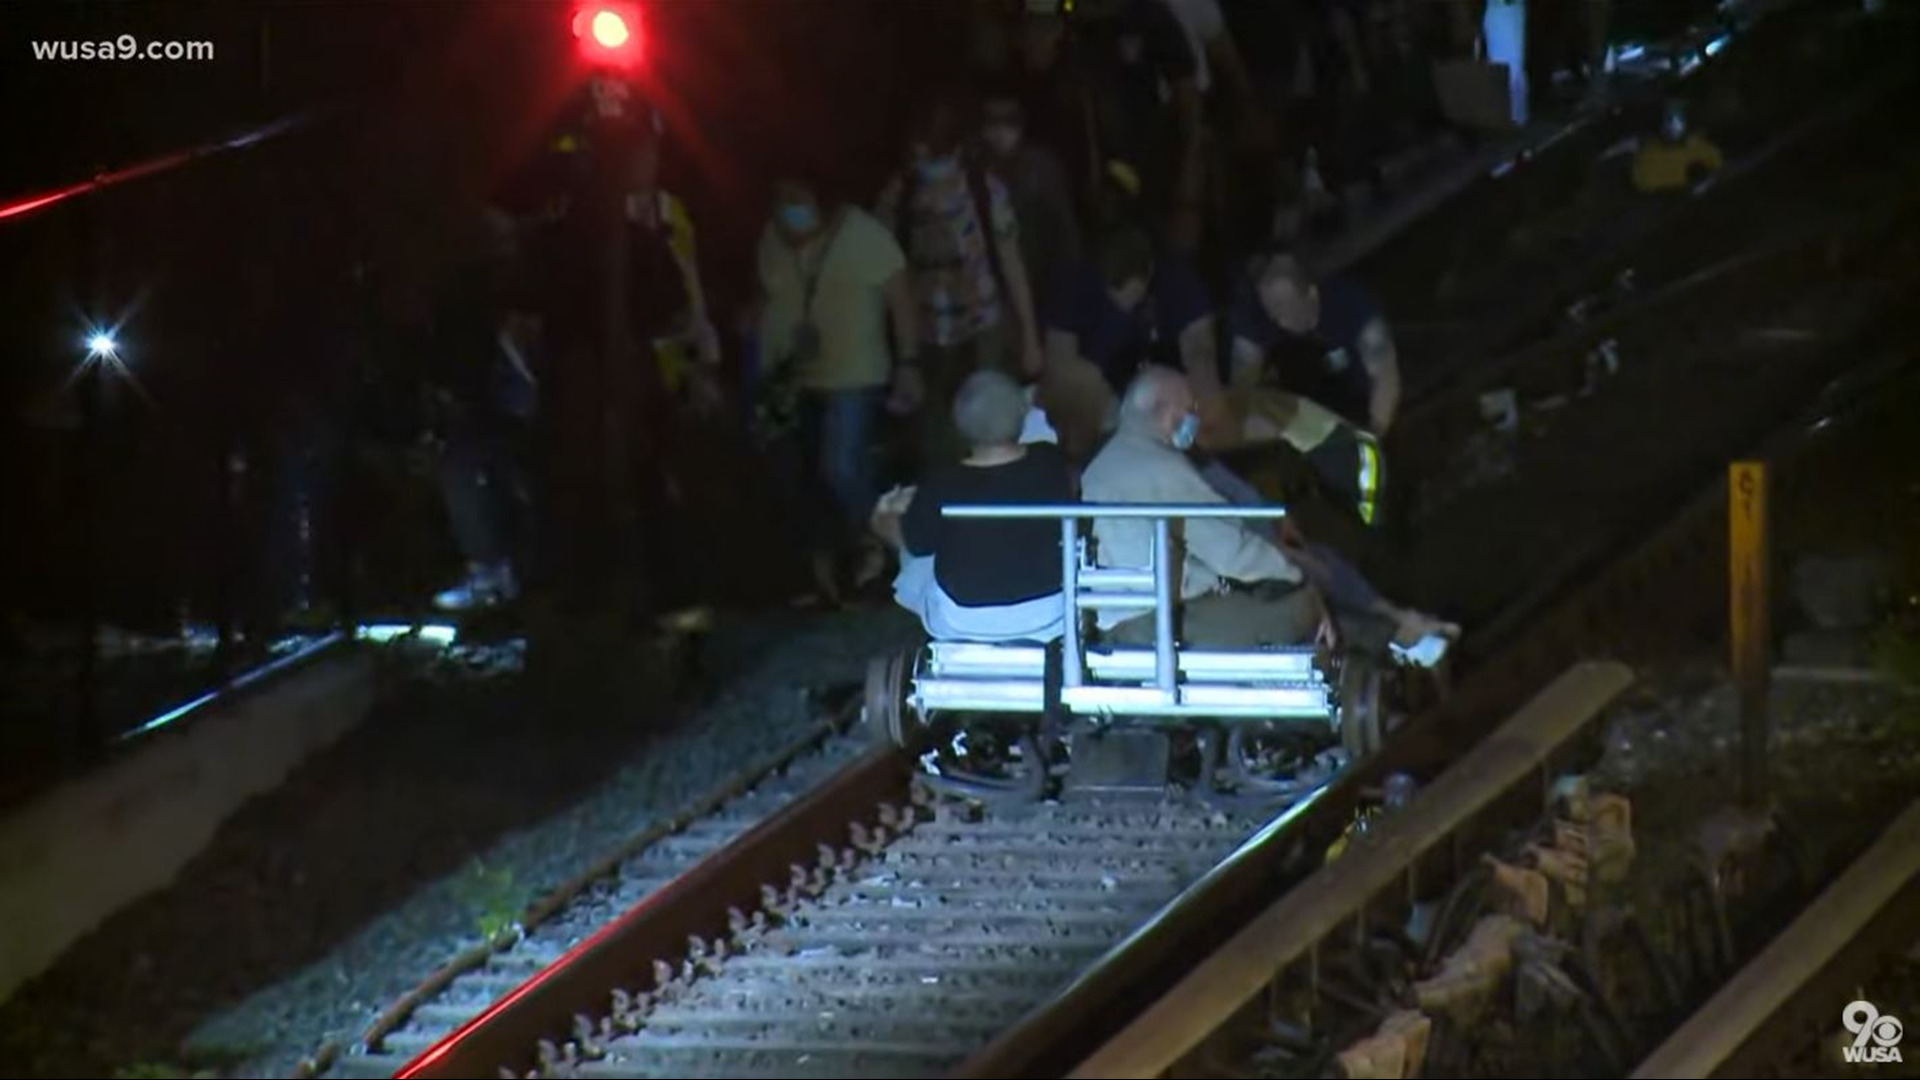 Hundreds of people were evacuated from a derailed Metro train near Arlington Cemetery Tuesday.